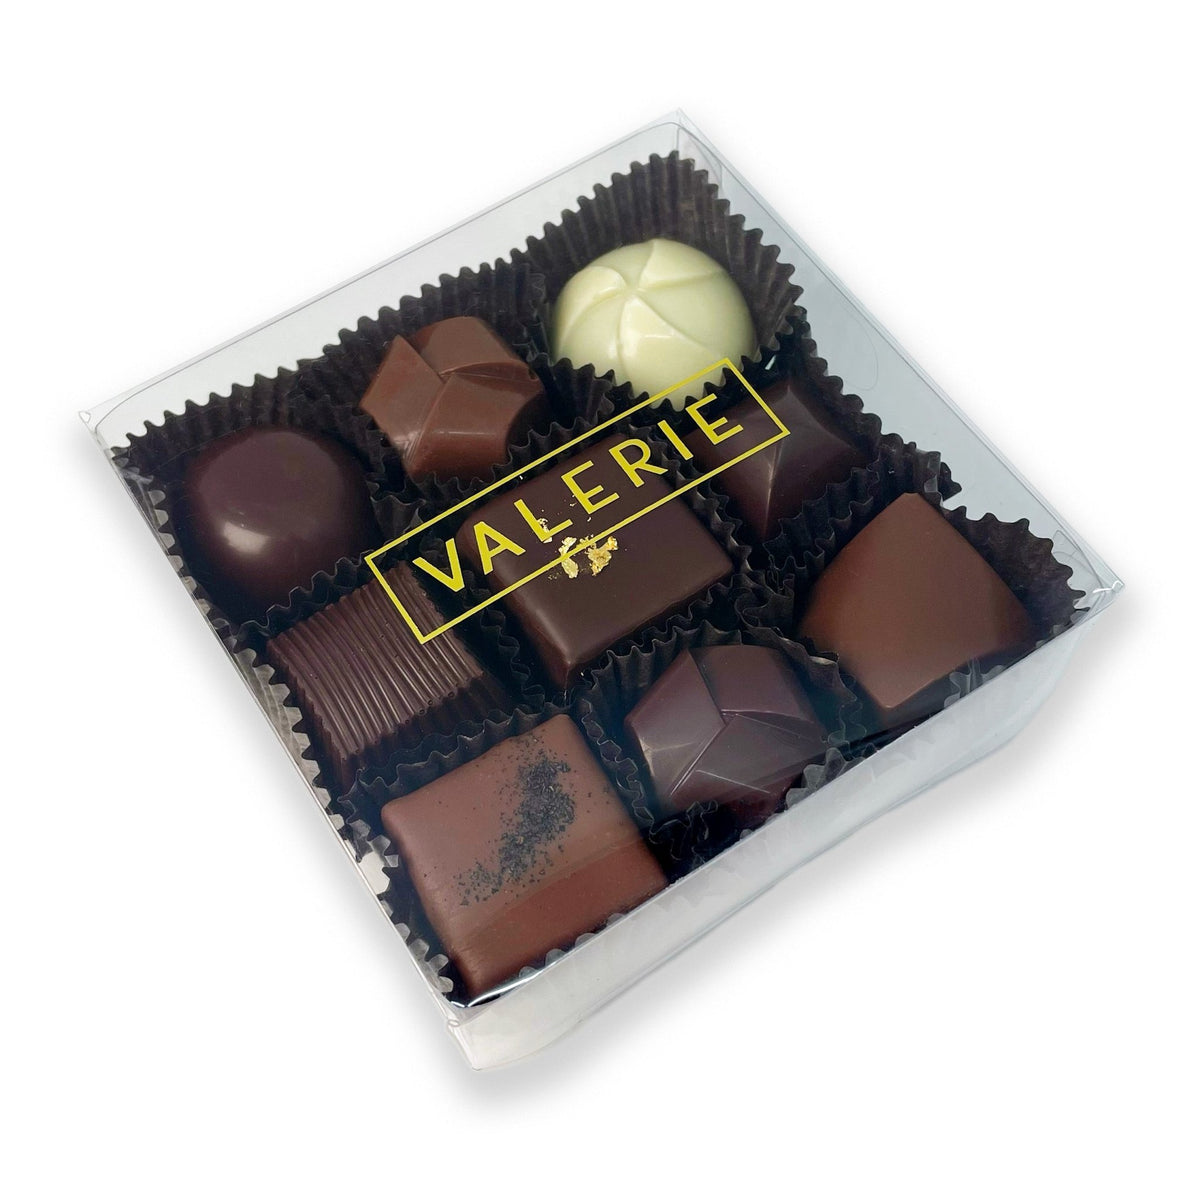 Small Truffle Assortment - Valerie Confections